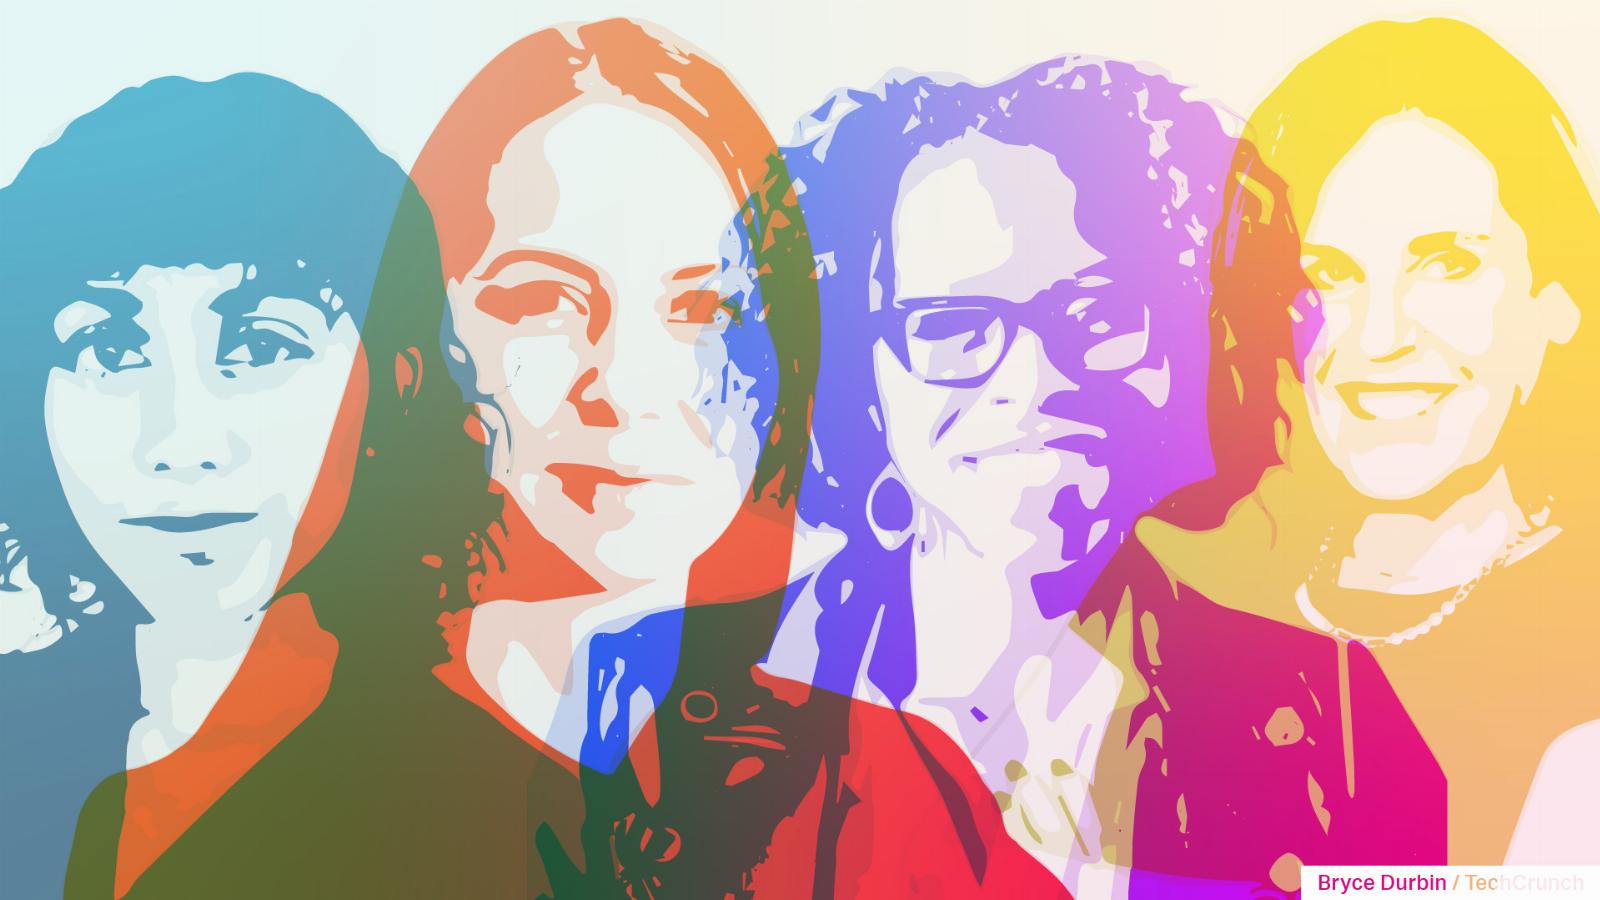 What we’ve learned from the women behind the AI revolution